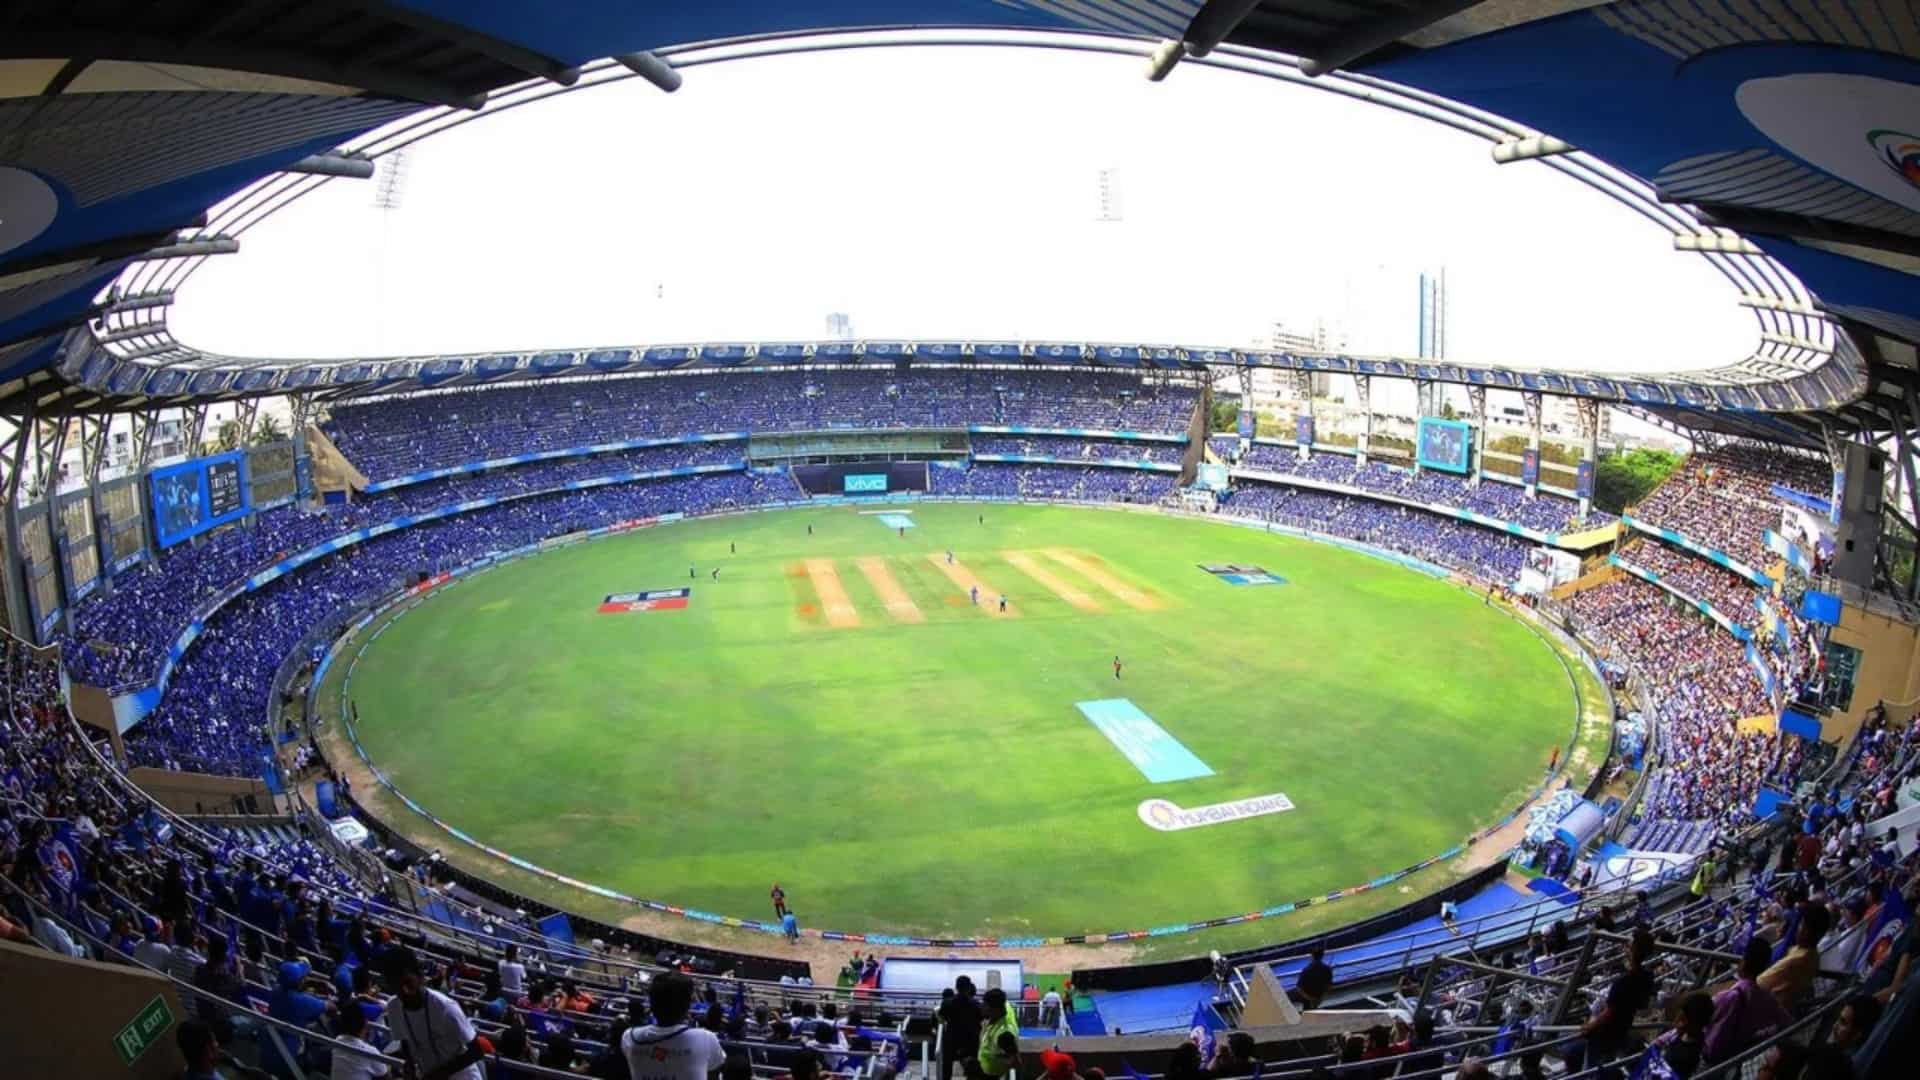 Mumbai Cricket Association (MCA) officials have been asked to carry a negative COVID-19 test report if they want to attend the Indian Premier League (IPL) matches at the Wankhede Stadium.